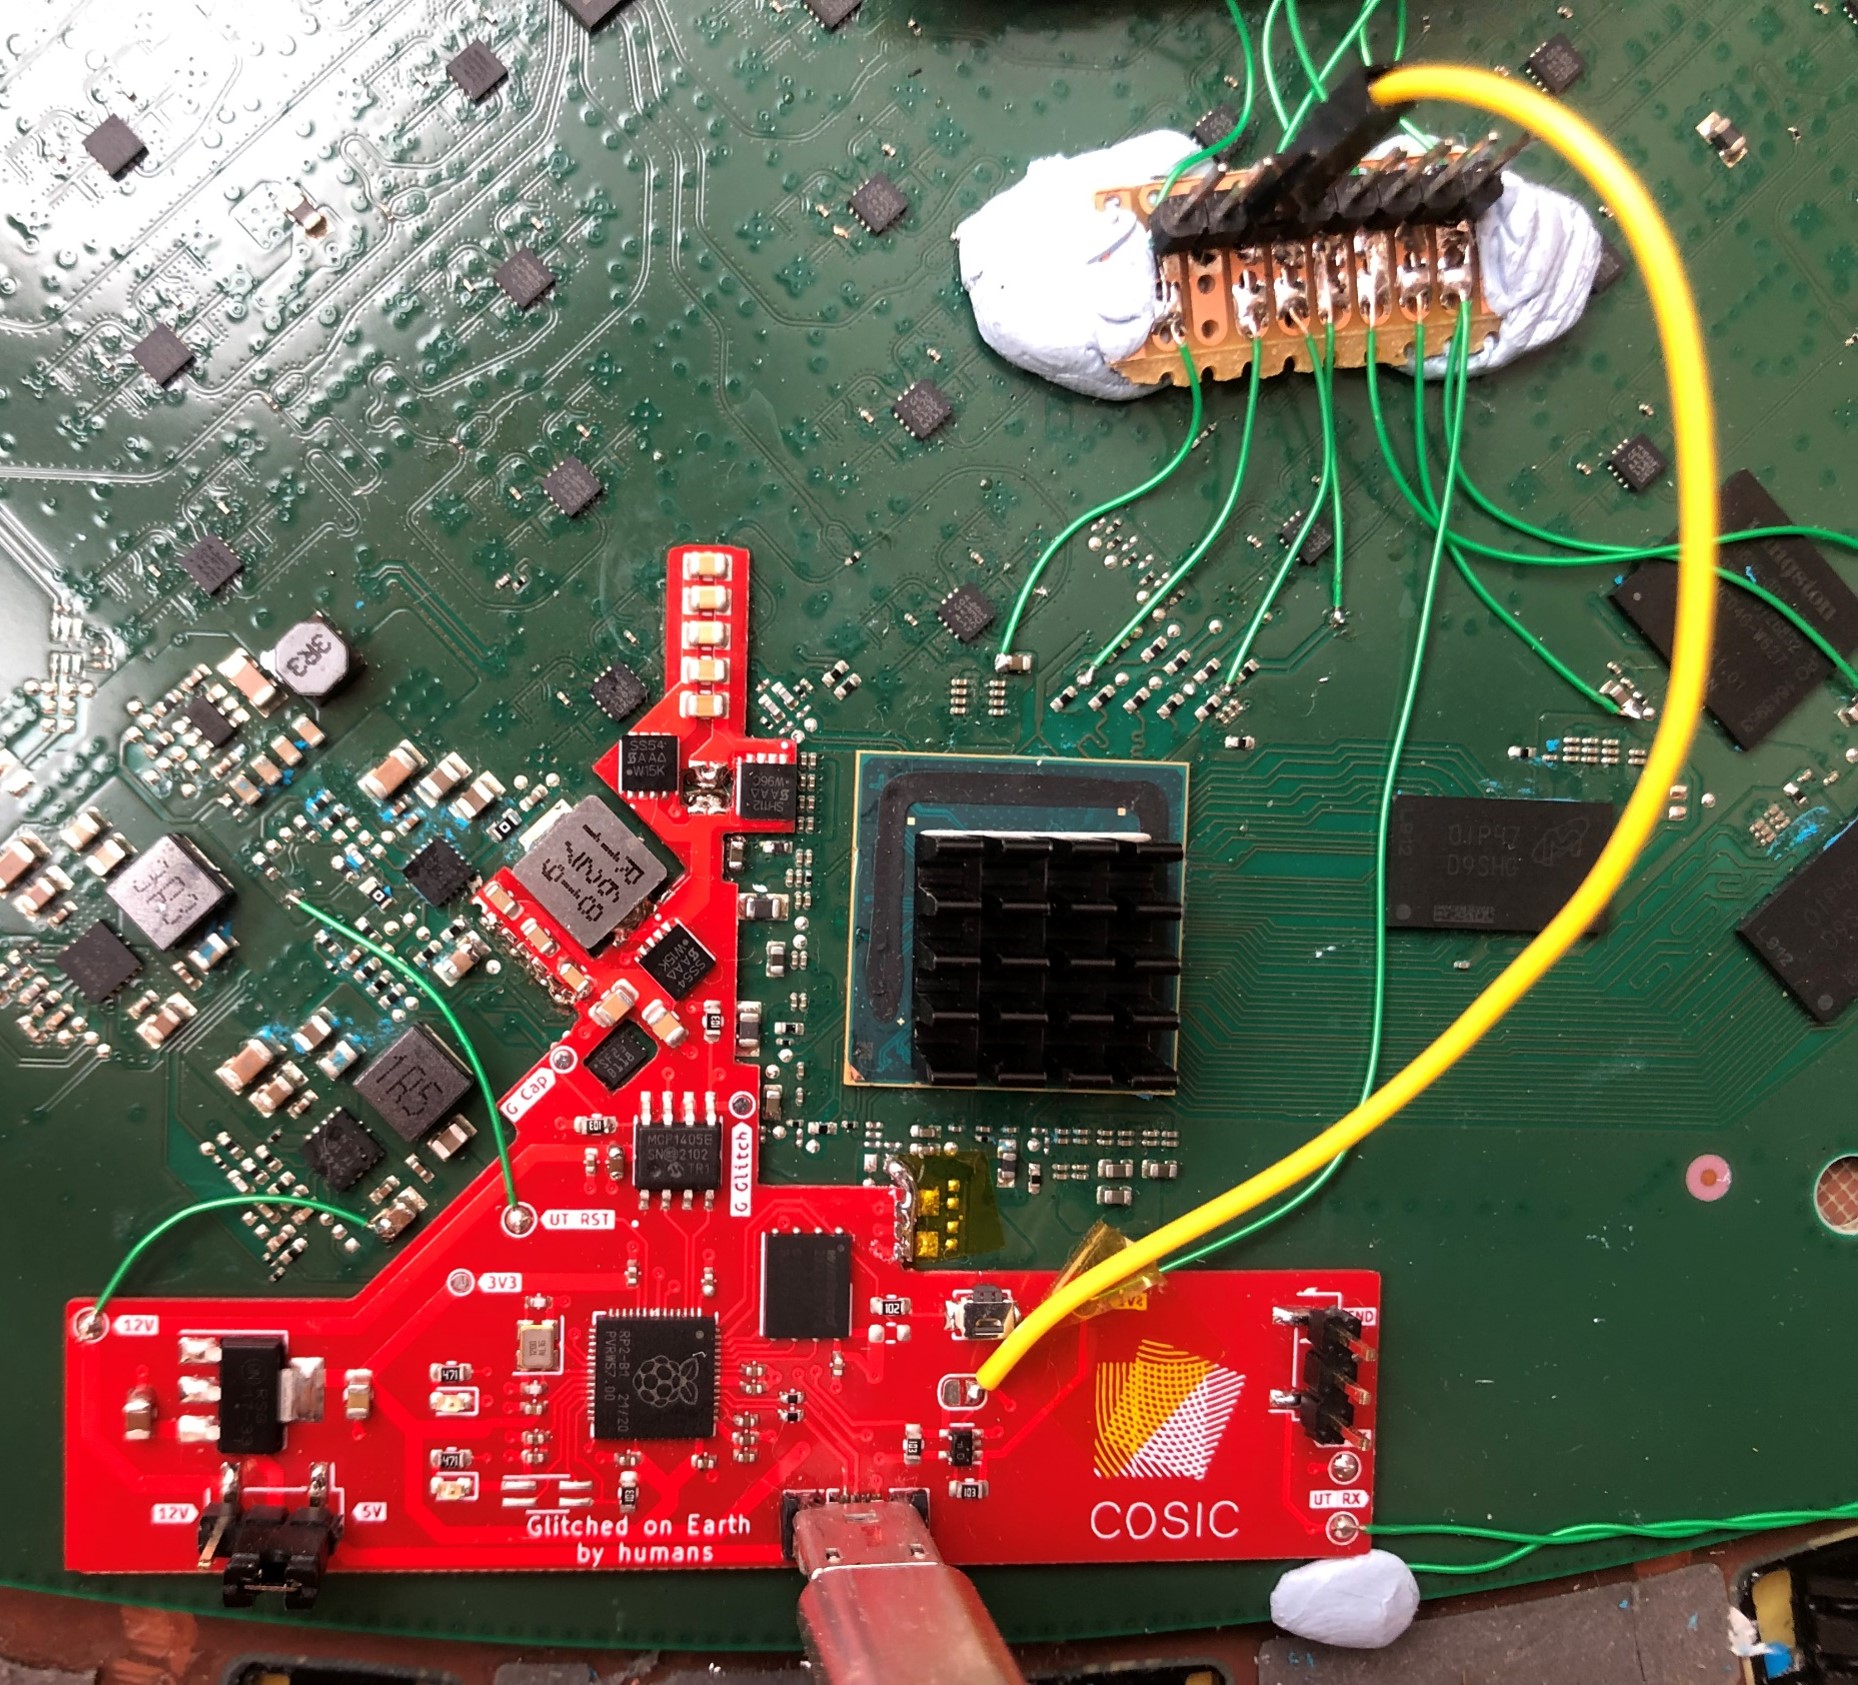 Modchip mounted to the UT.